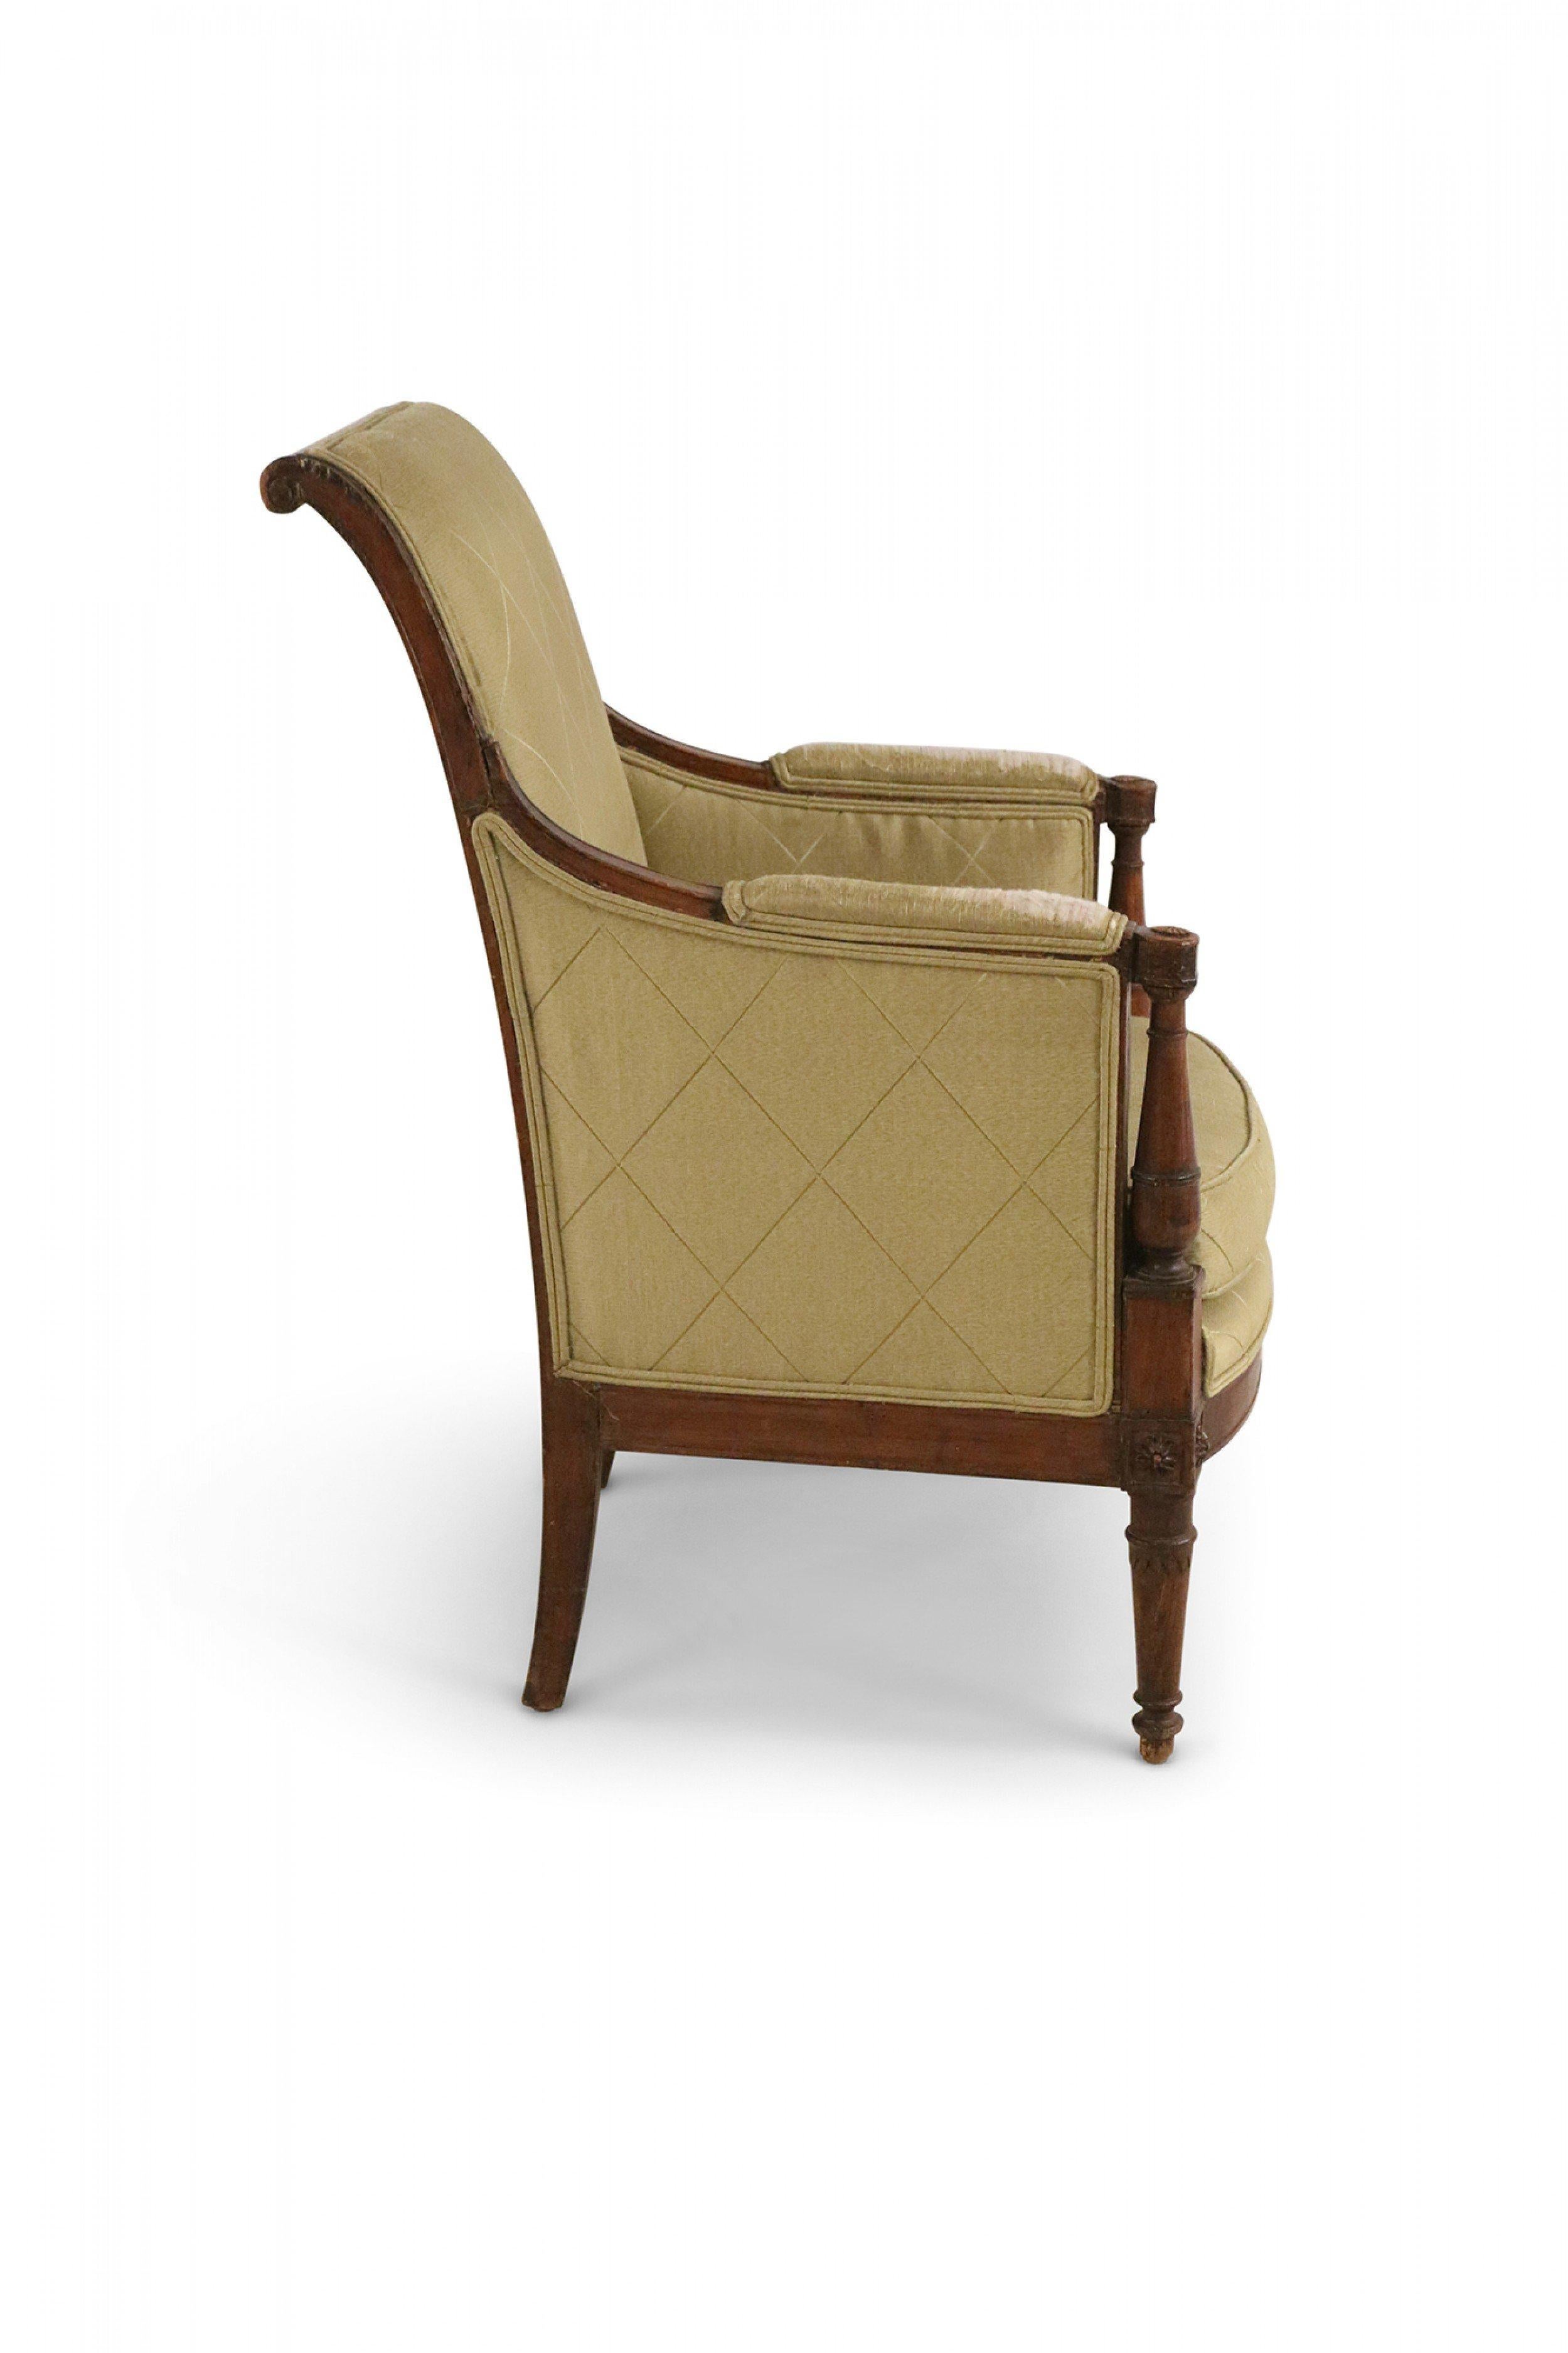 Fabric French Directoire Green Diamond Pattern Upholstered Mahogany Bergere Armchair For Sale